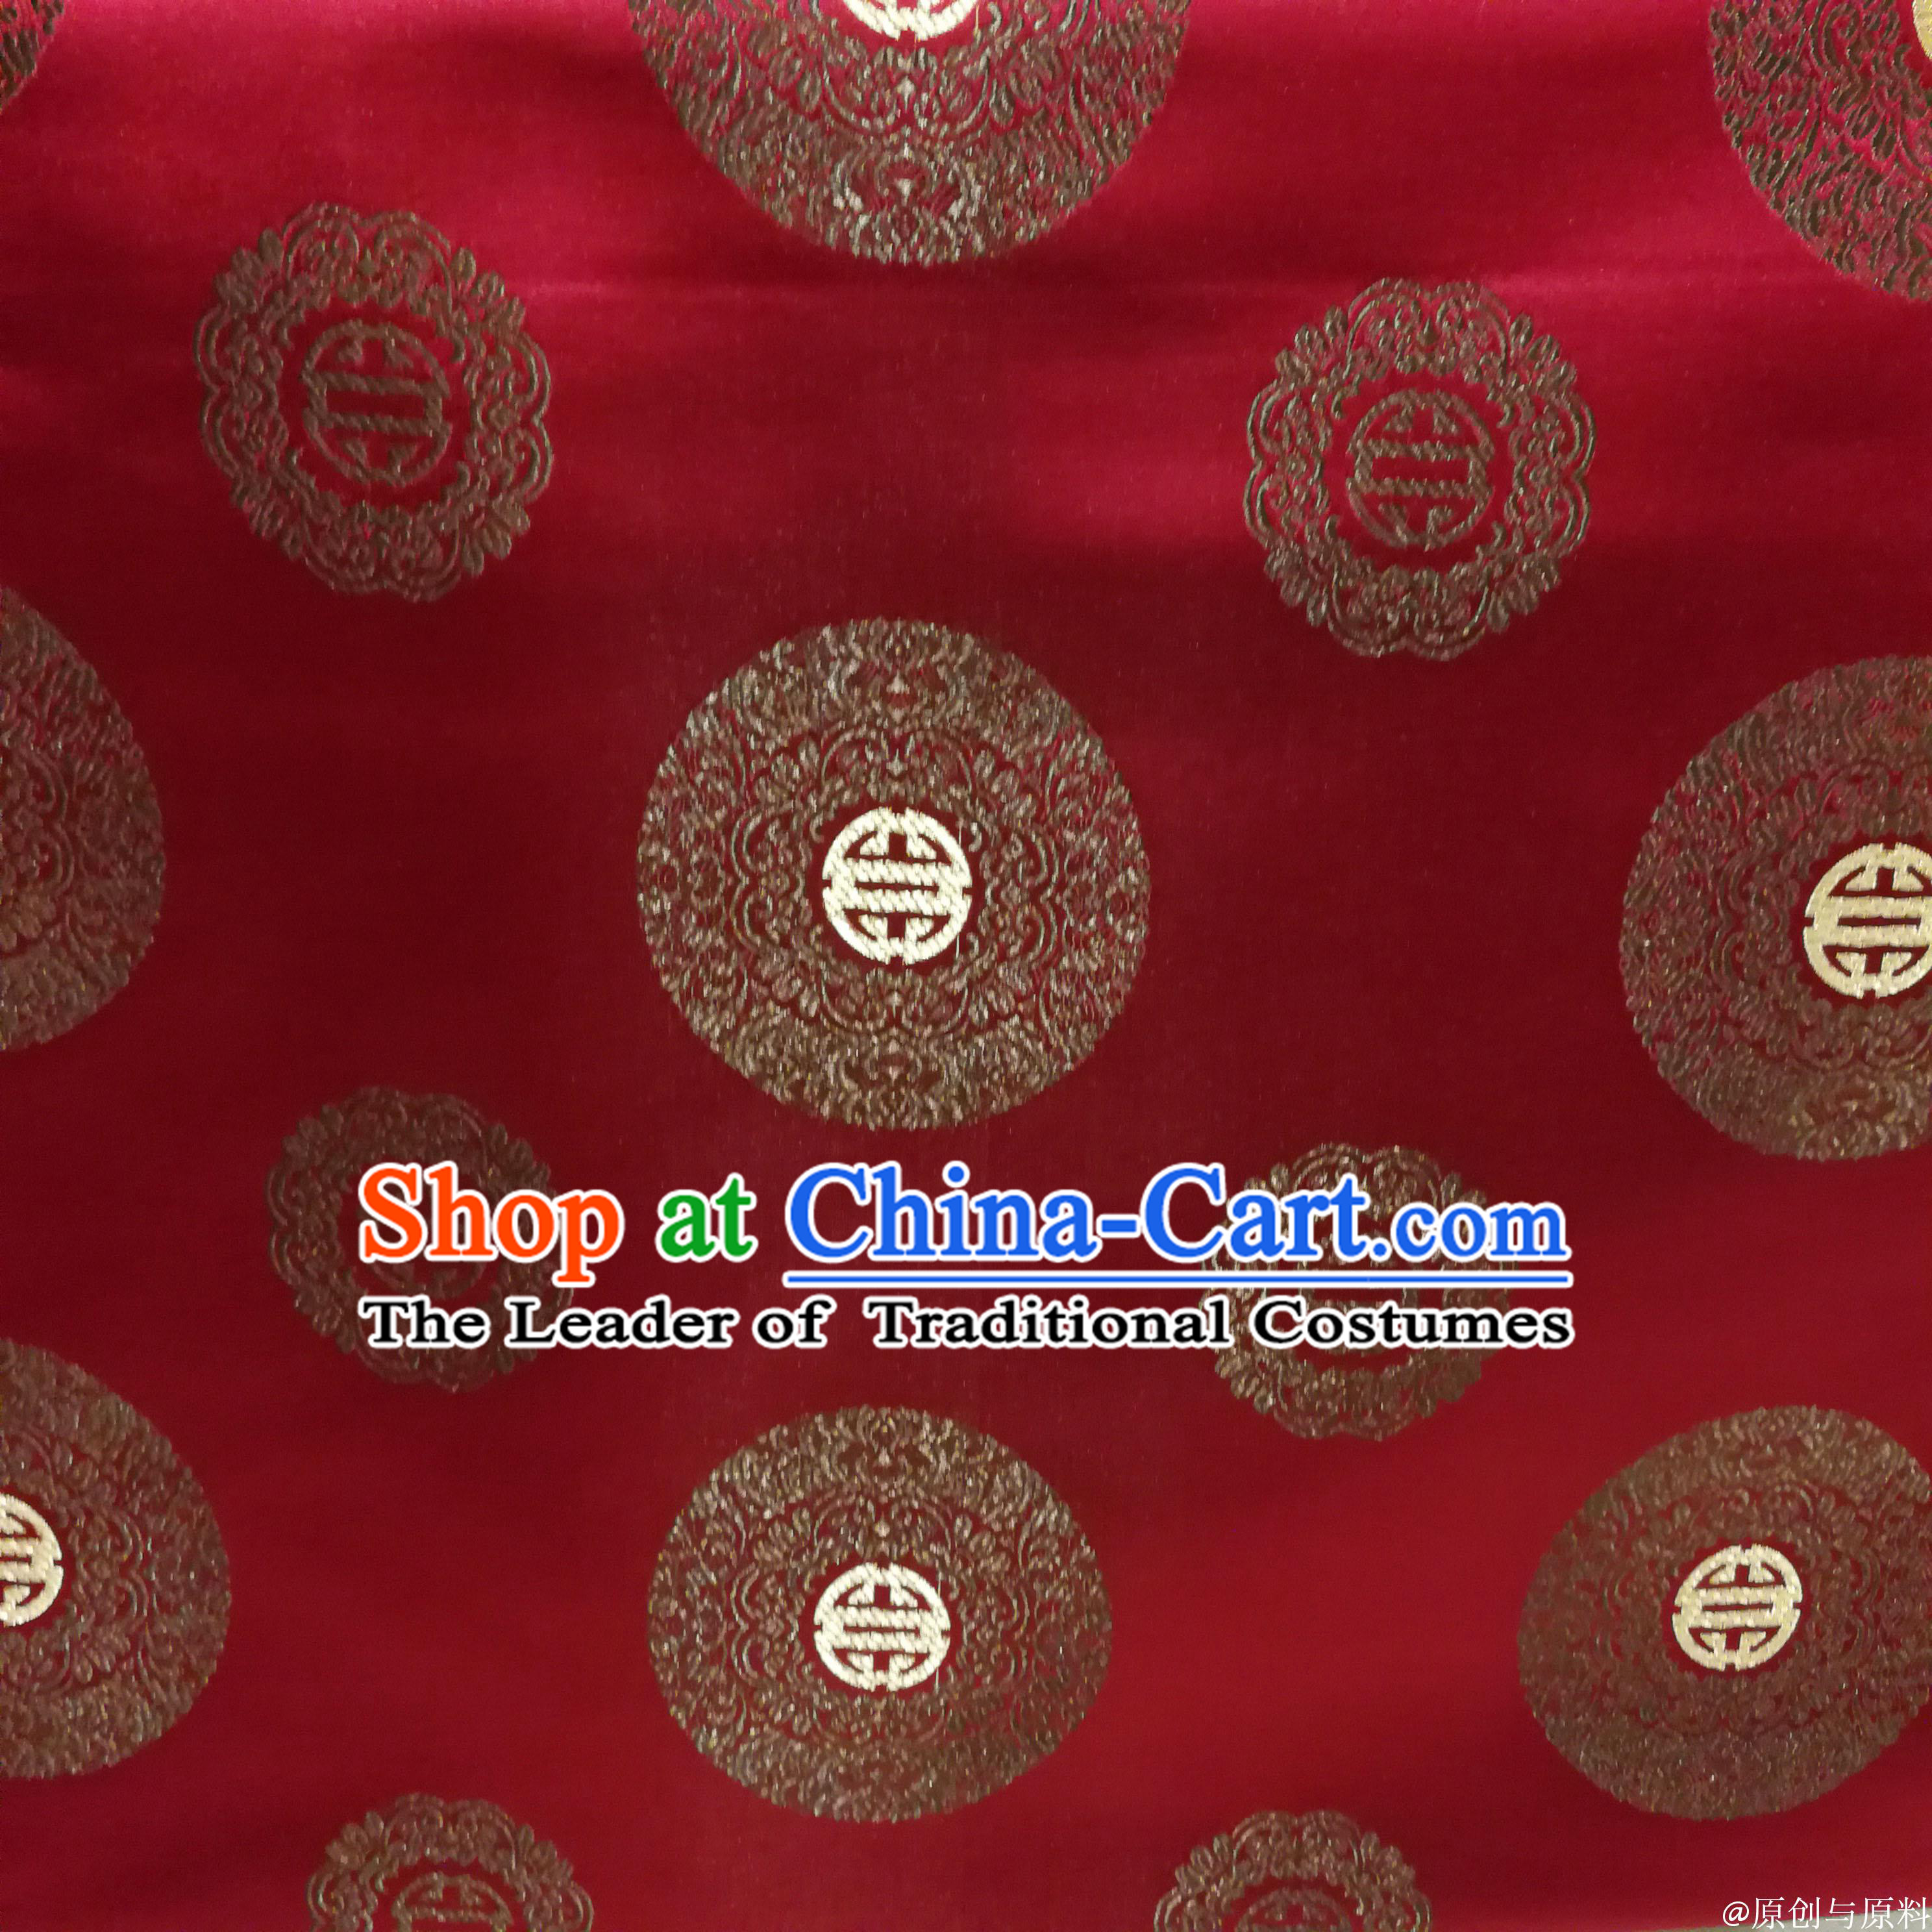 Red Color Chinese Royal Palace Style Traditional Pattern Auspicious Cloud Design Brocade Fabric Silk Fabric Chinese Fabric Asian Material